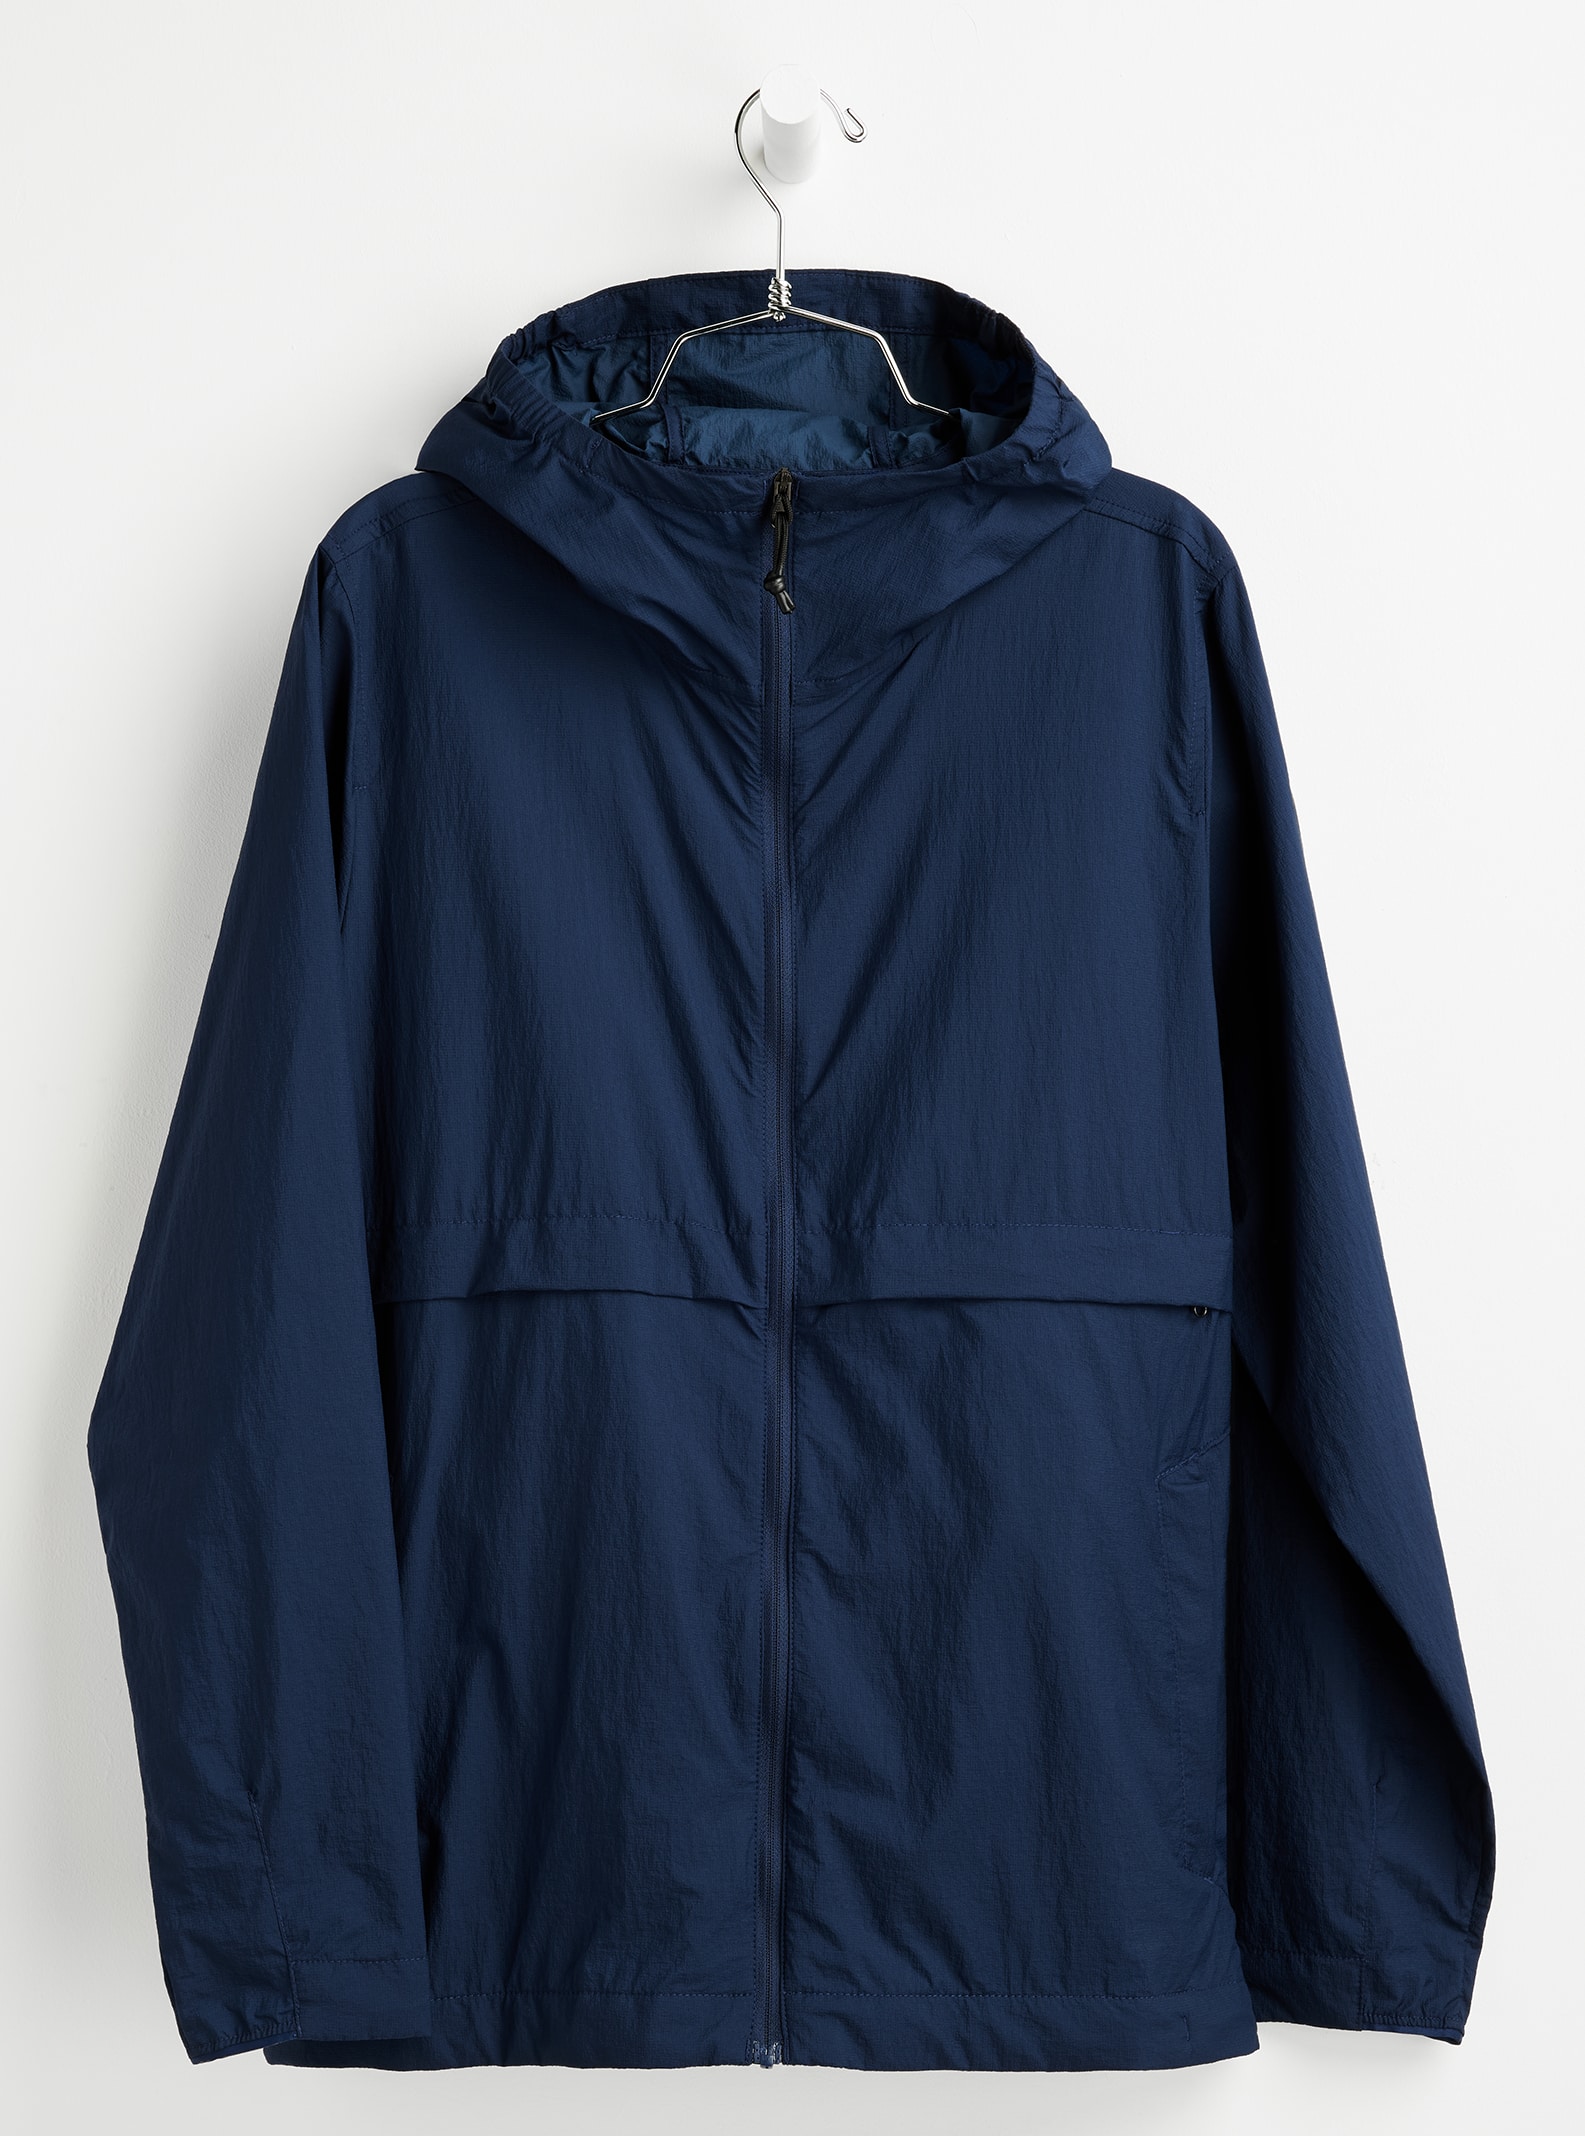 Beams Plus Smock - The Best Picture Of Beam